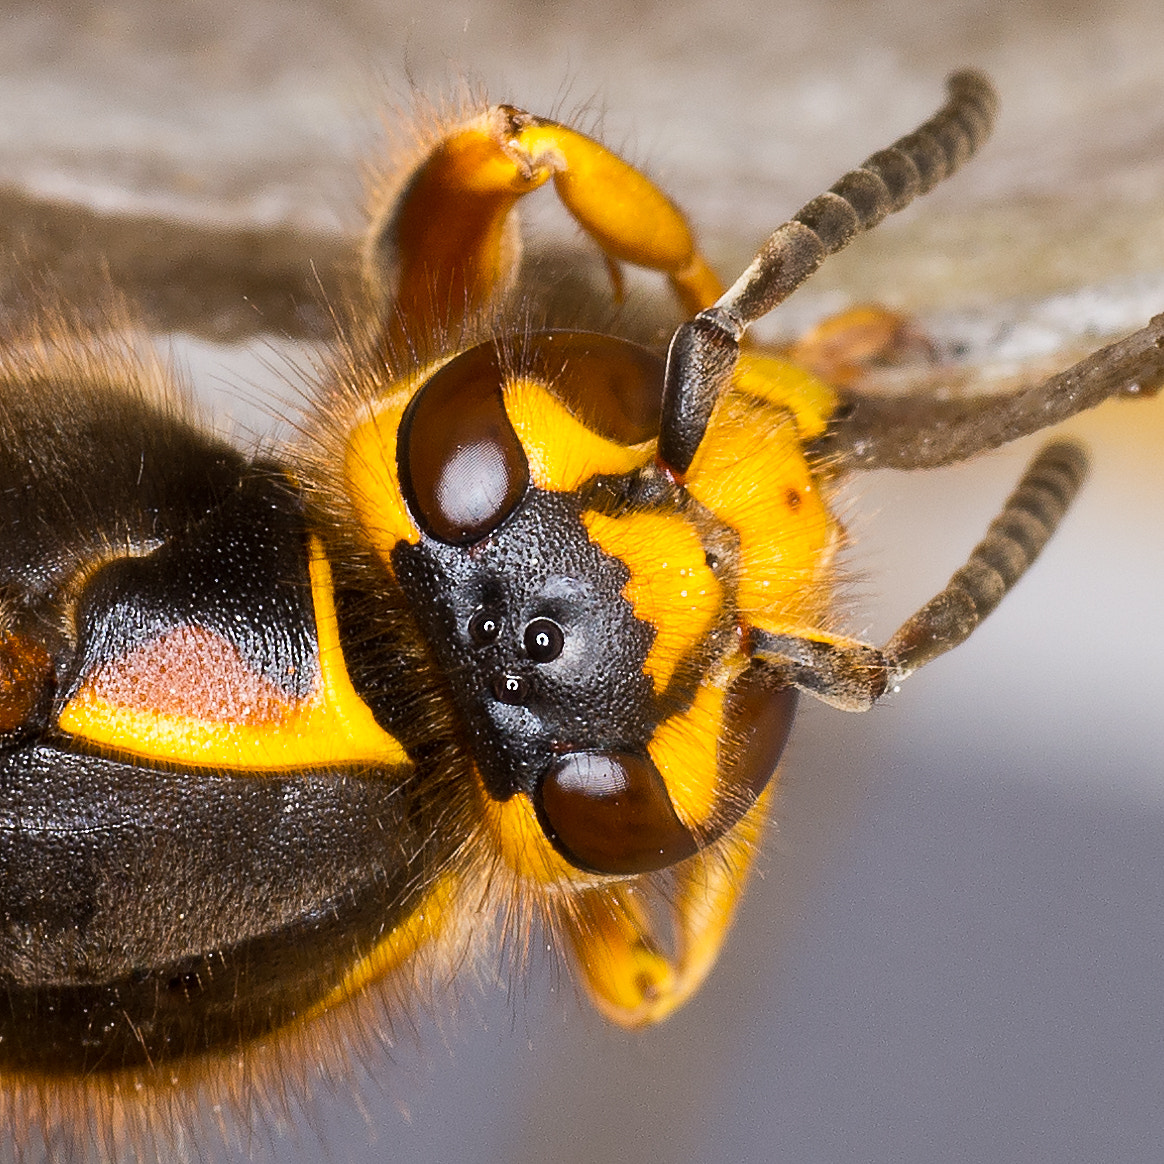 Nikon D800 sample photo. The head of a wasp queen photography